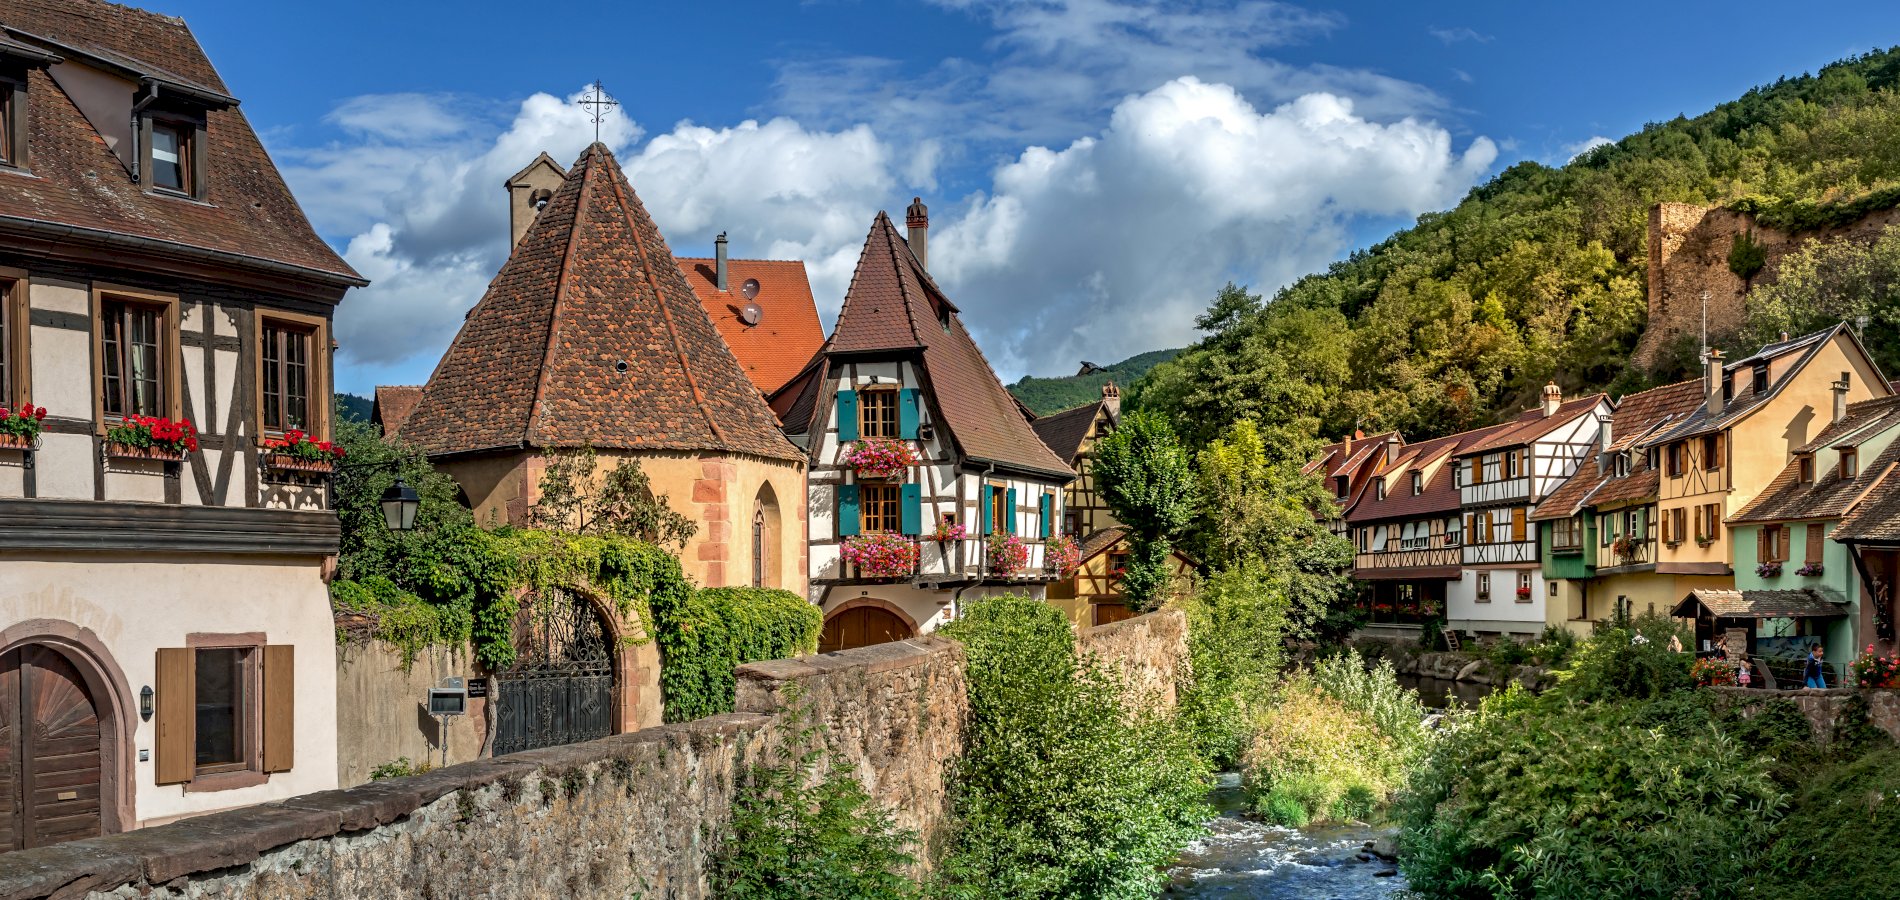 Ophorus Tours - A Private Day Trip From Colmar to visit Alsace Breweries & Taste local Delicacies